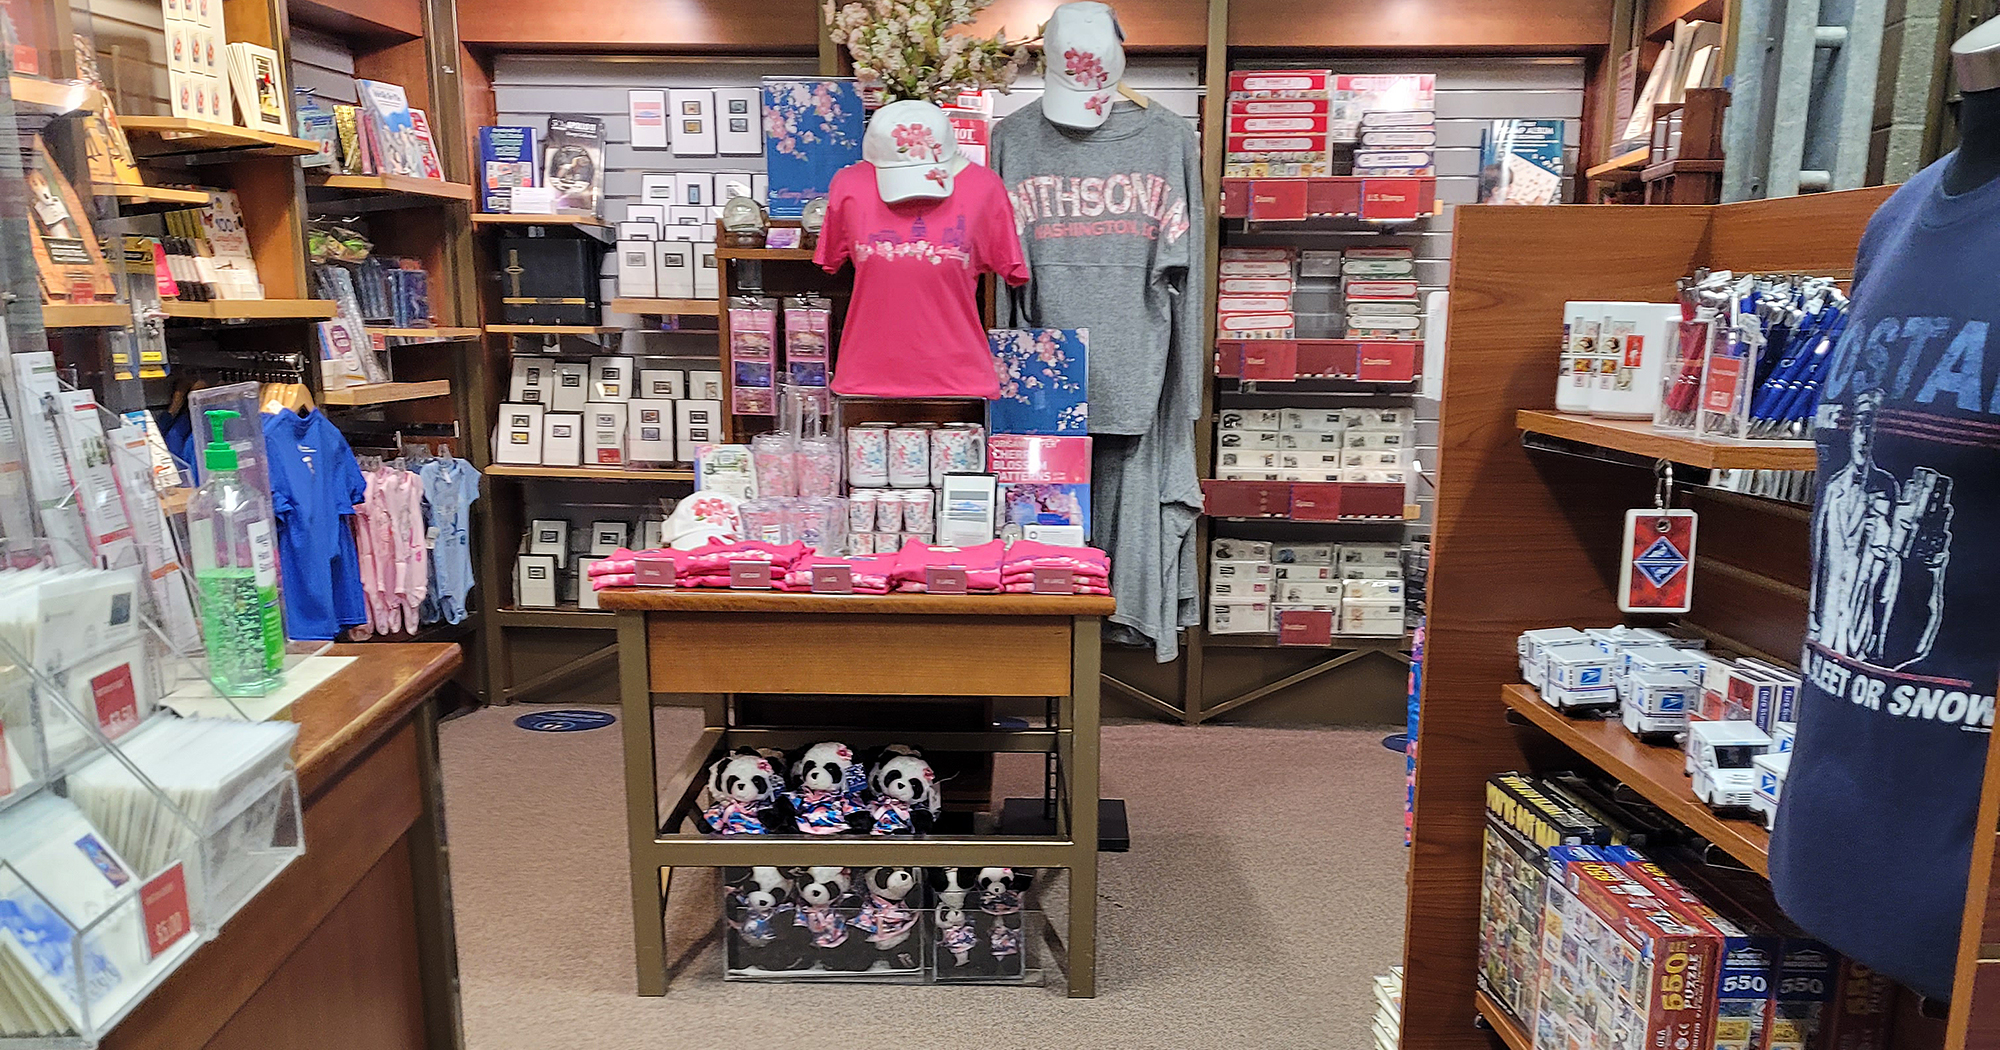 A display of merchandise for sale in the museum shop